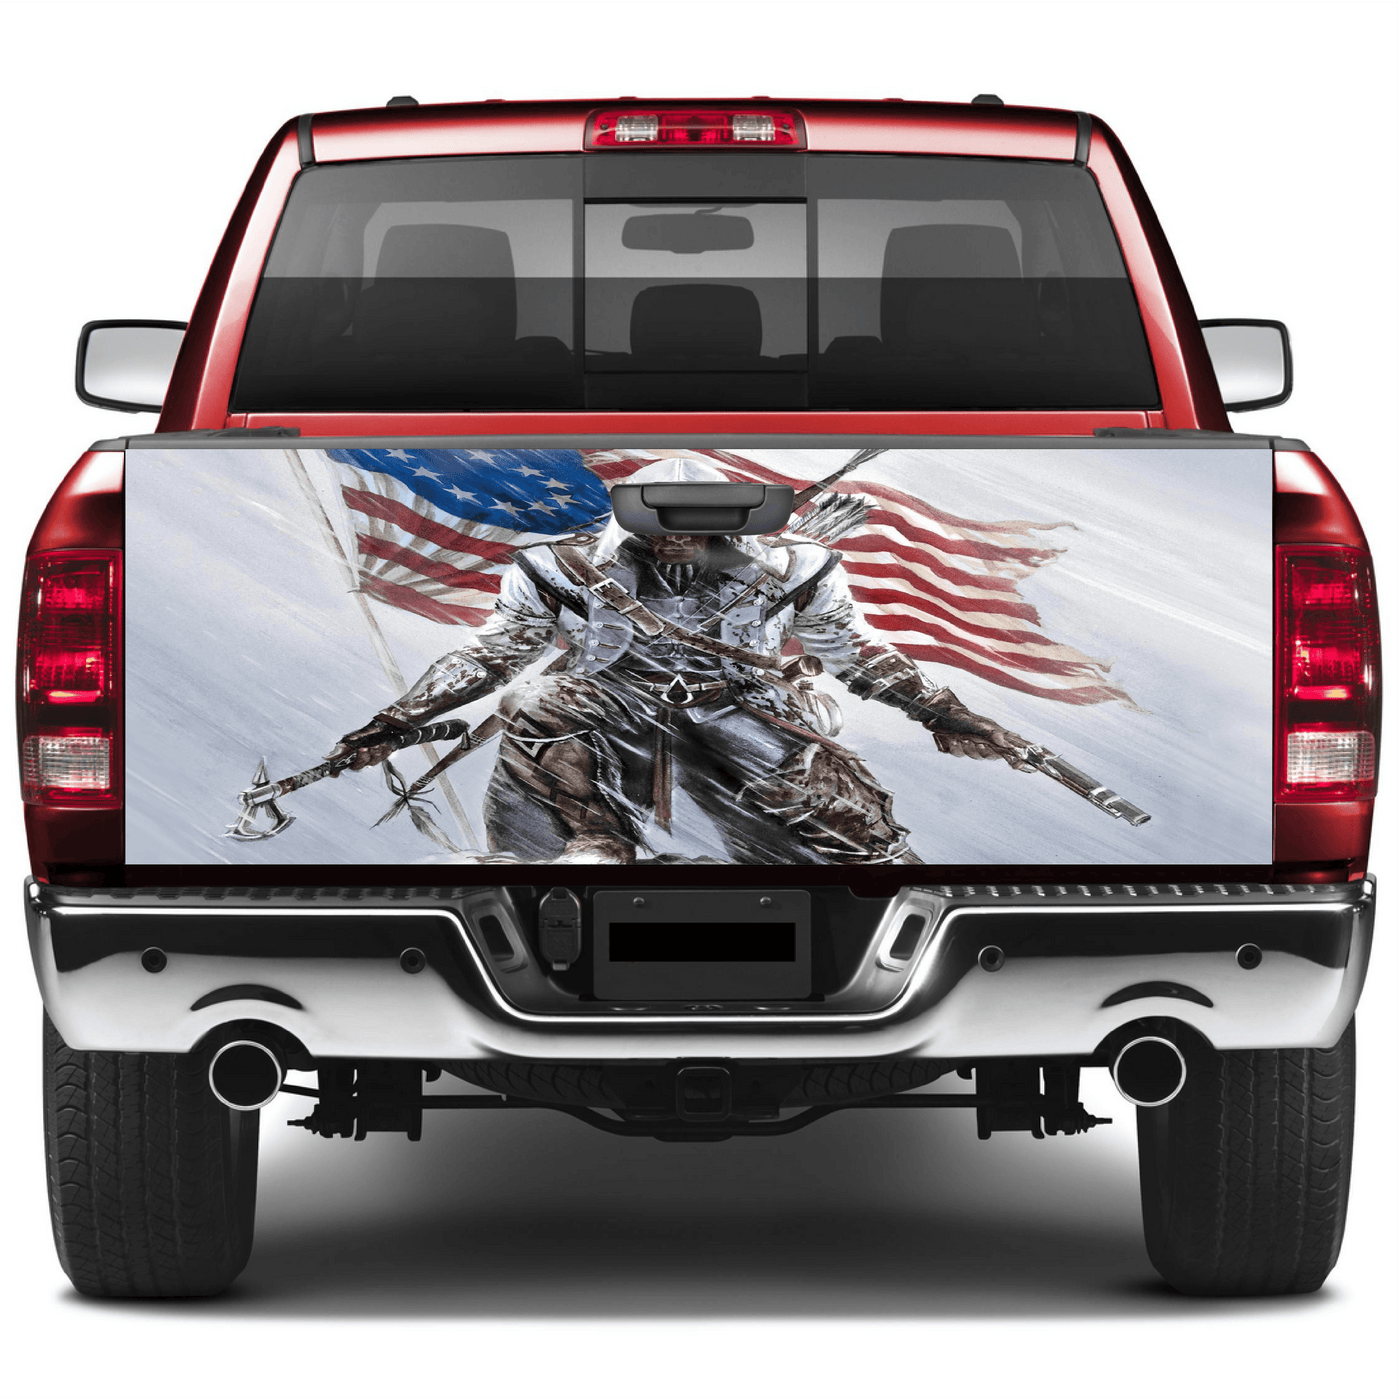 Tailgate Wraps For Trucks Wrap Vinyl Car Decals Assassin's Creed 3 American Revolution SUV Car Sticker